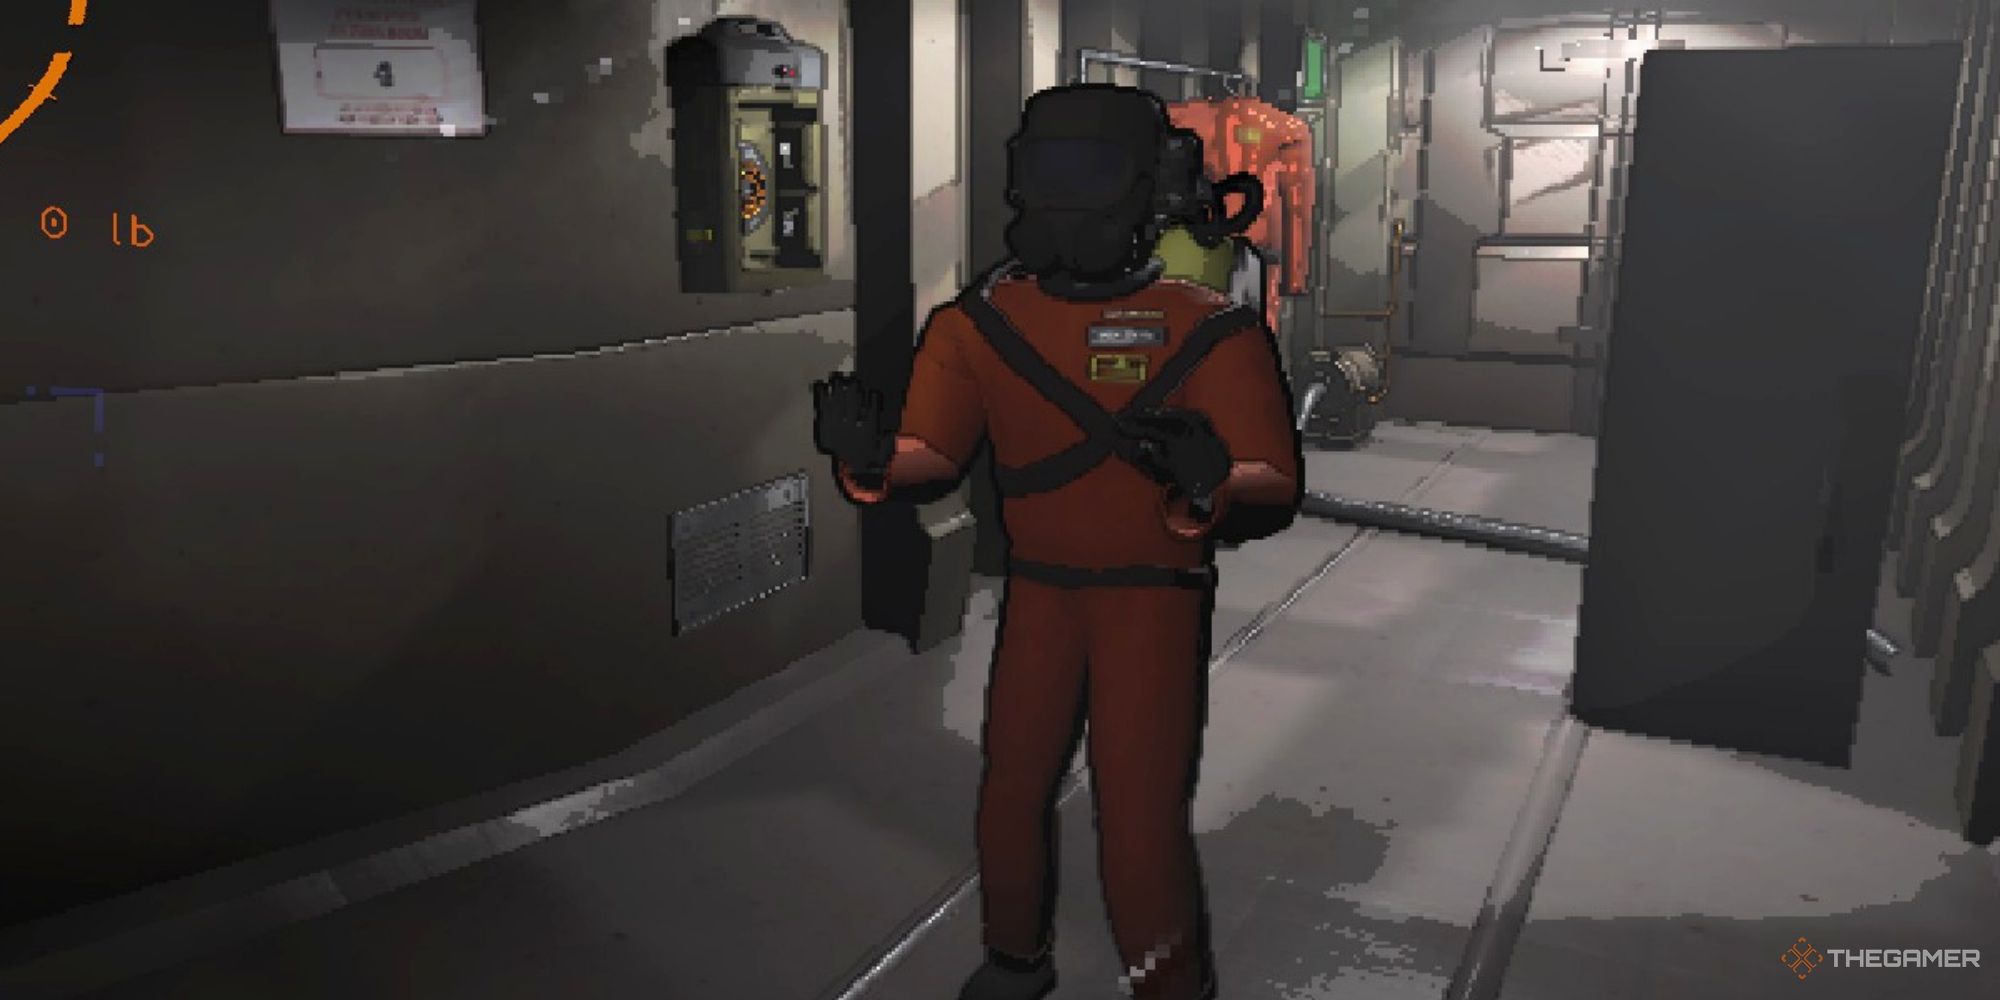 A screenshot from Lethal Company showing a character doing the default dance on the ship